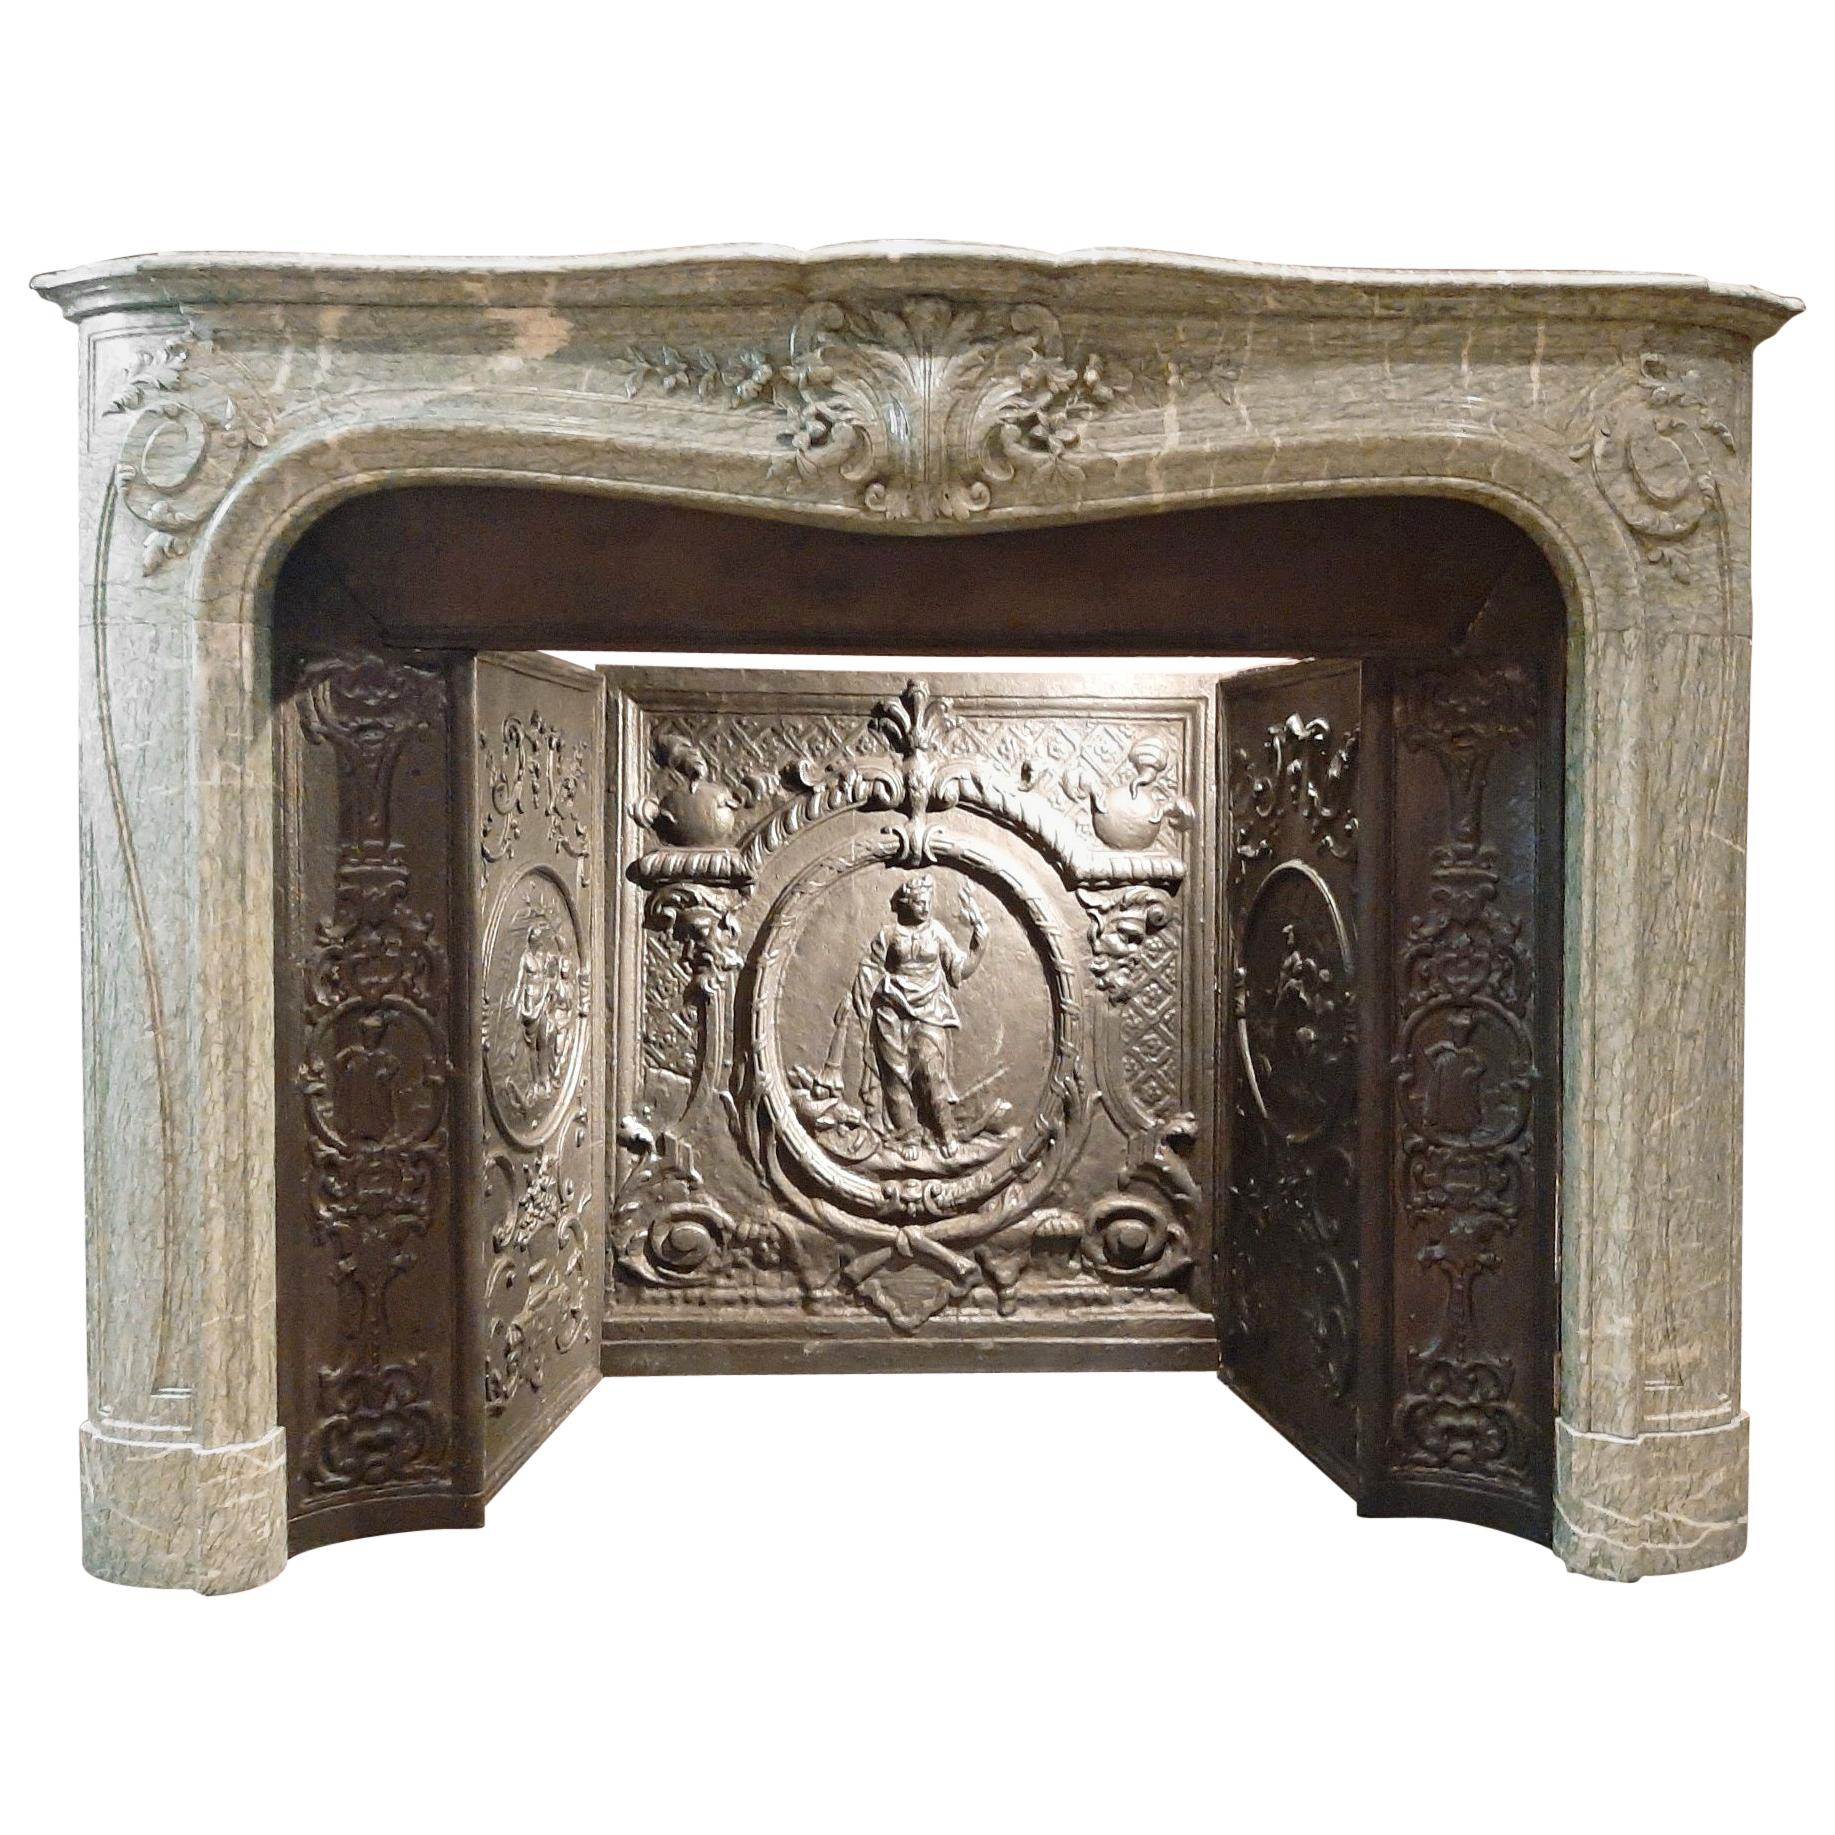 19th Century Vert d'Estours Marble Fireplace with Complete Cast Iron Hearth